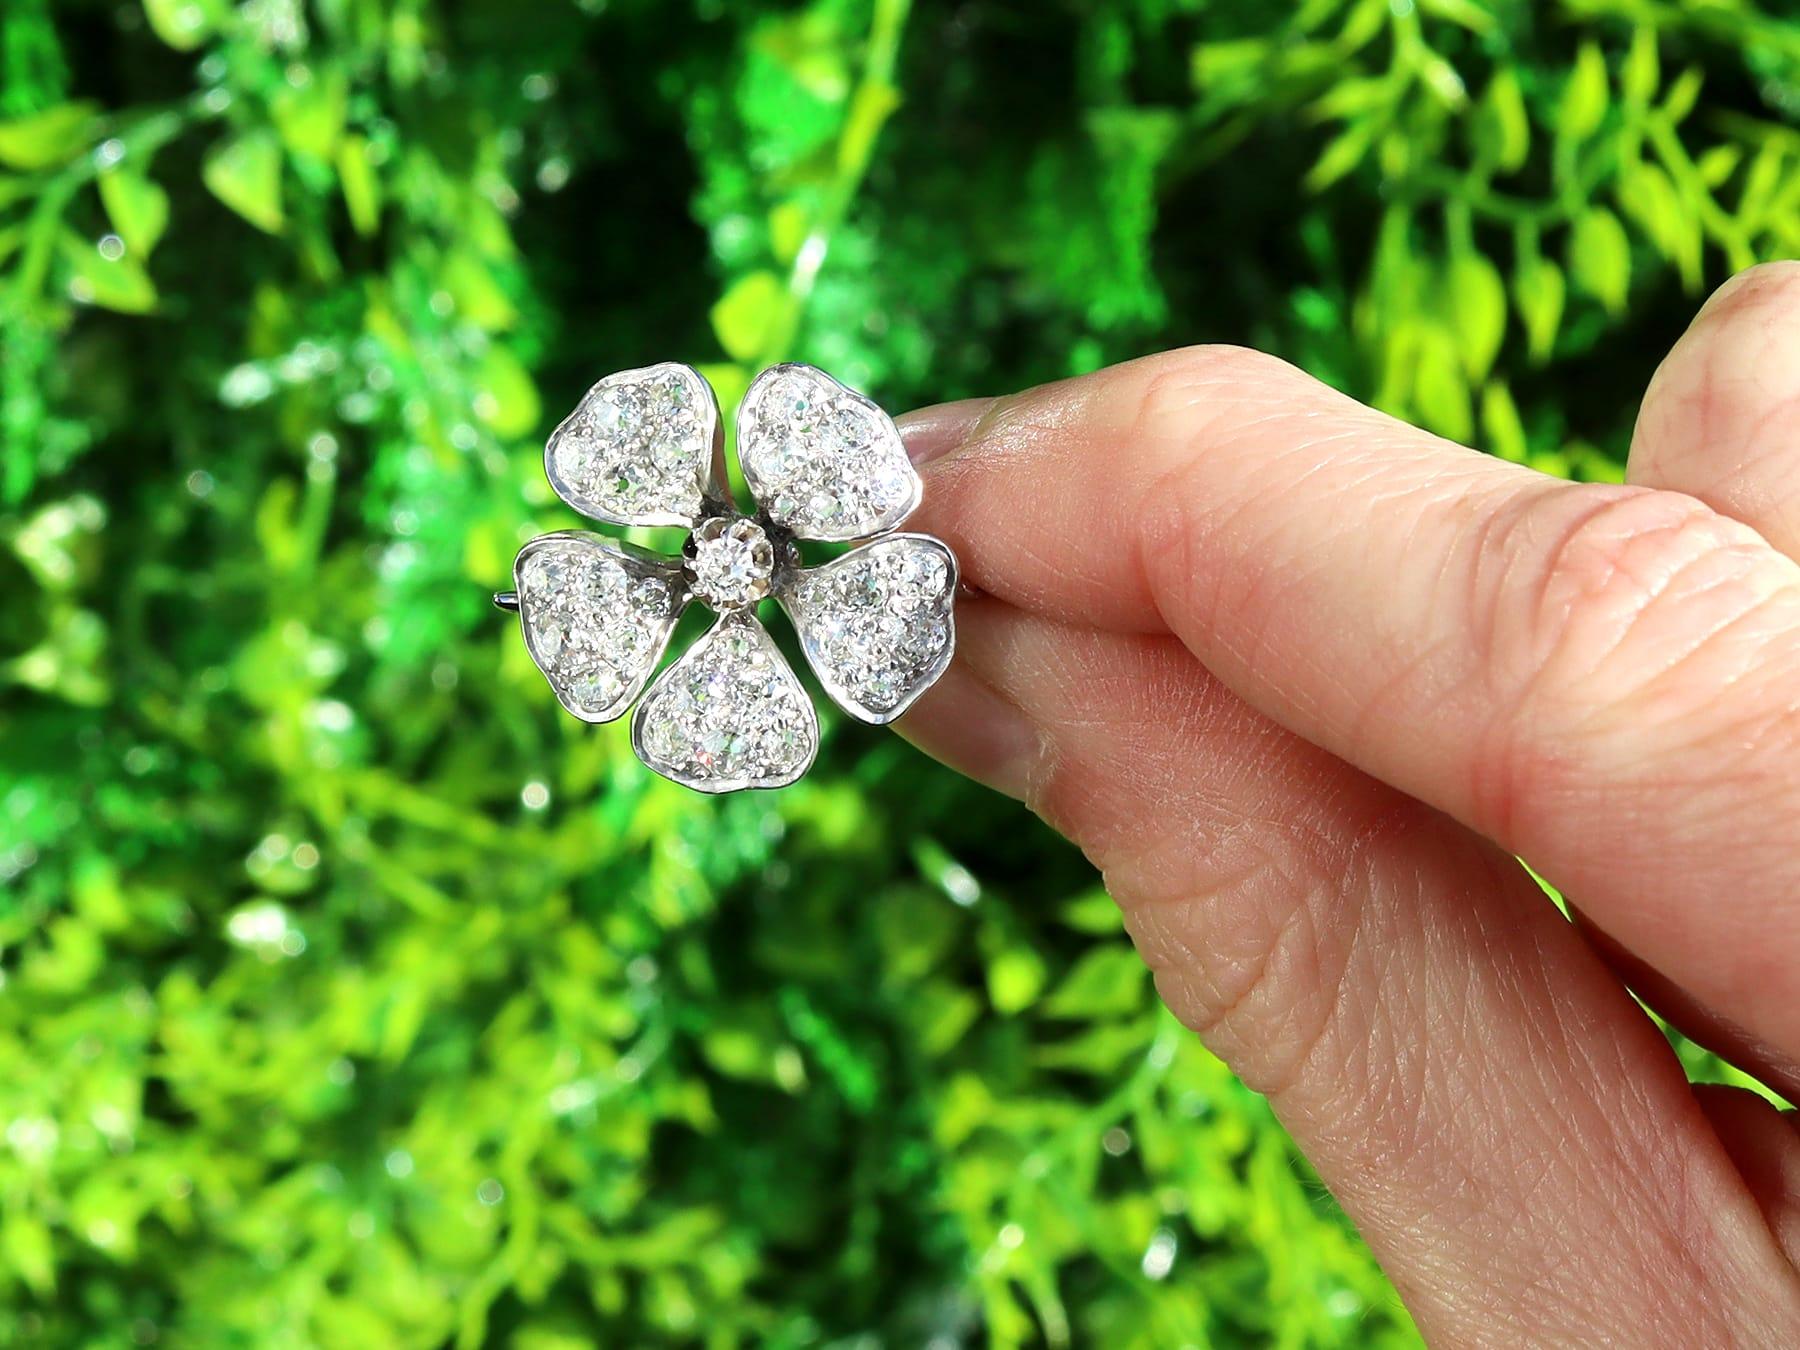 A stunning, fine and impressive antique Victorian 2.75 carat diamond and 9 karat white gold floral brooch; part of our diverse antique jewelry and estate jewelry collections.

This fine and impressive Victorian brooch has been crafted in 9k white